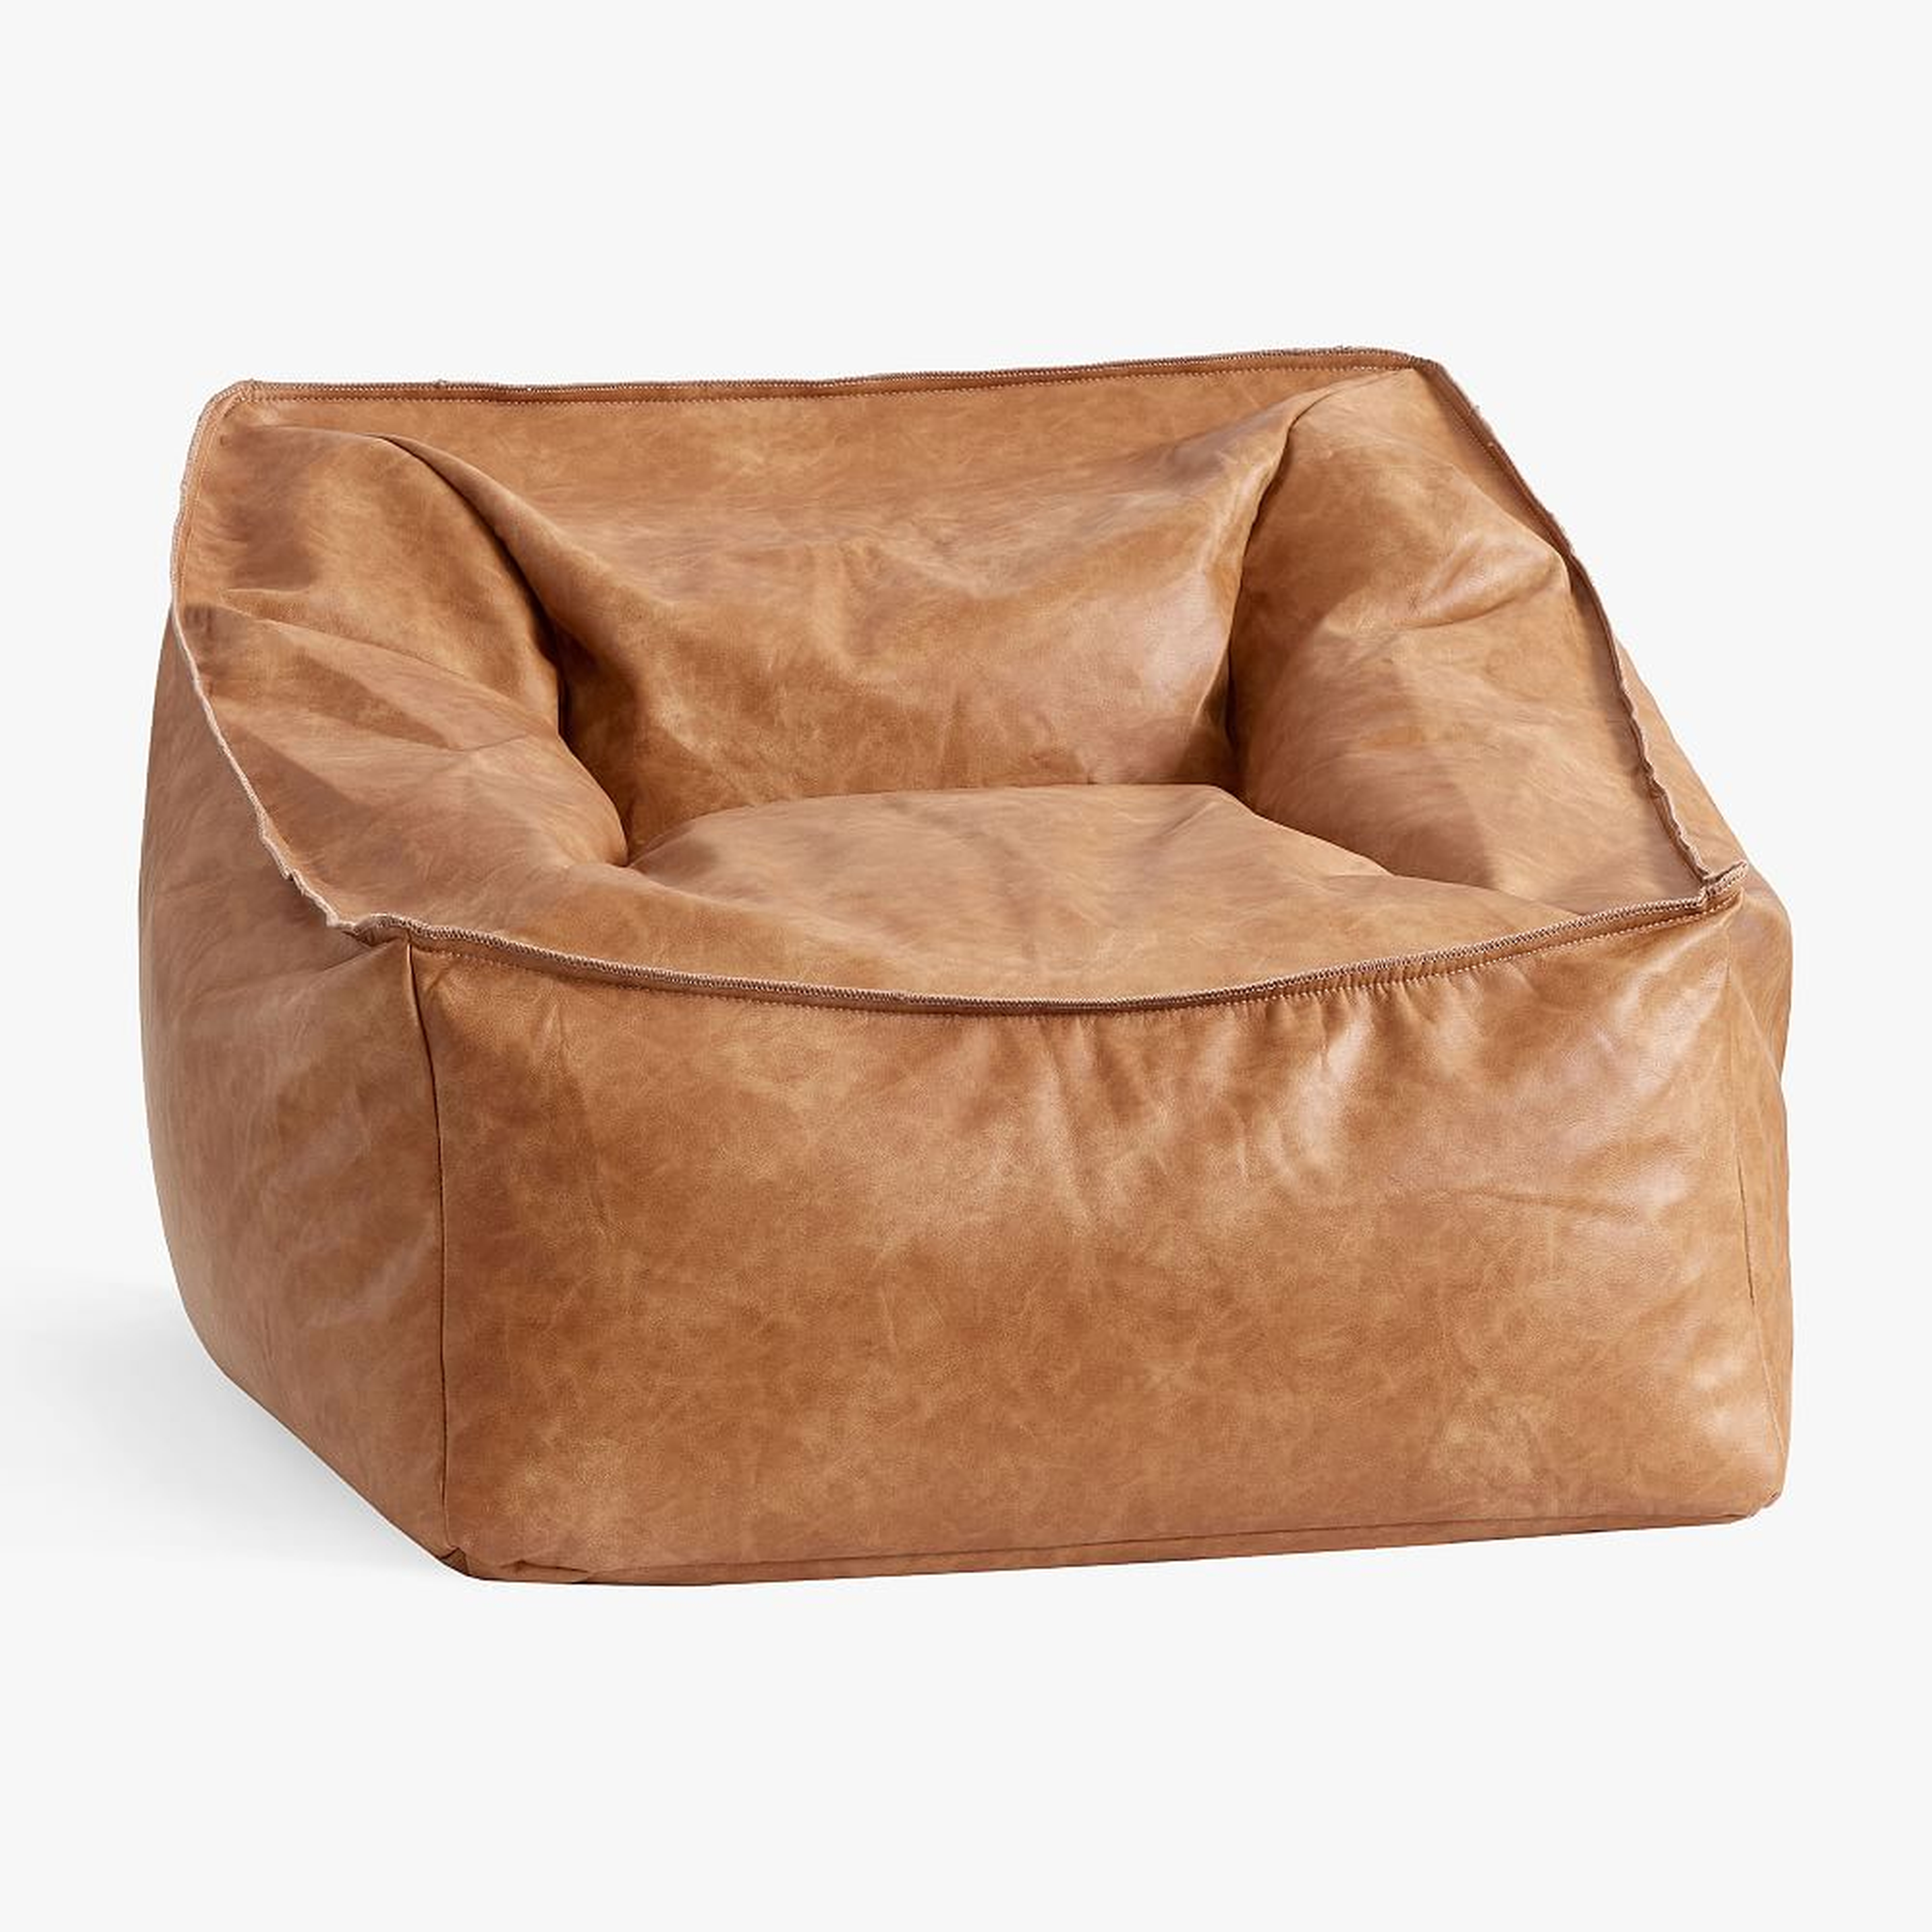 Modern Lounger, Small, Faux Leather Caramel 28x28 - Pottery Barn Teen